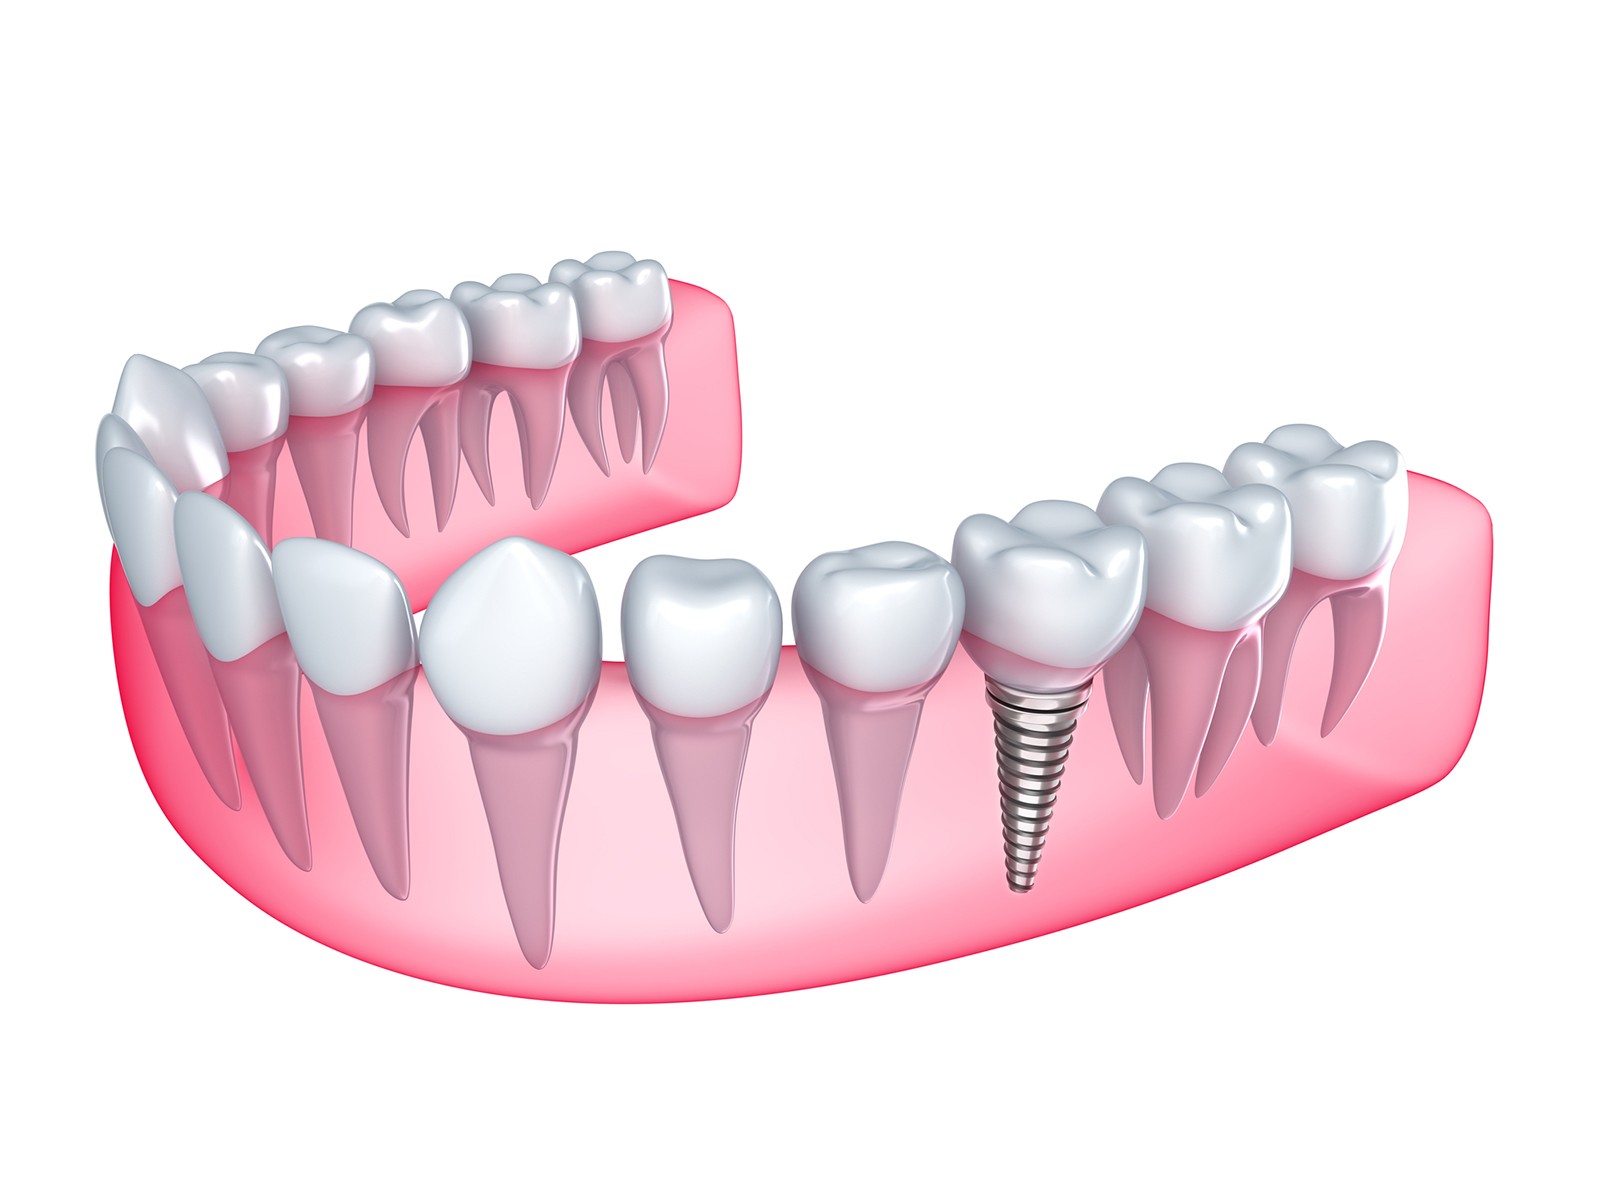 How can I get help paying for dental implants?